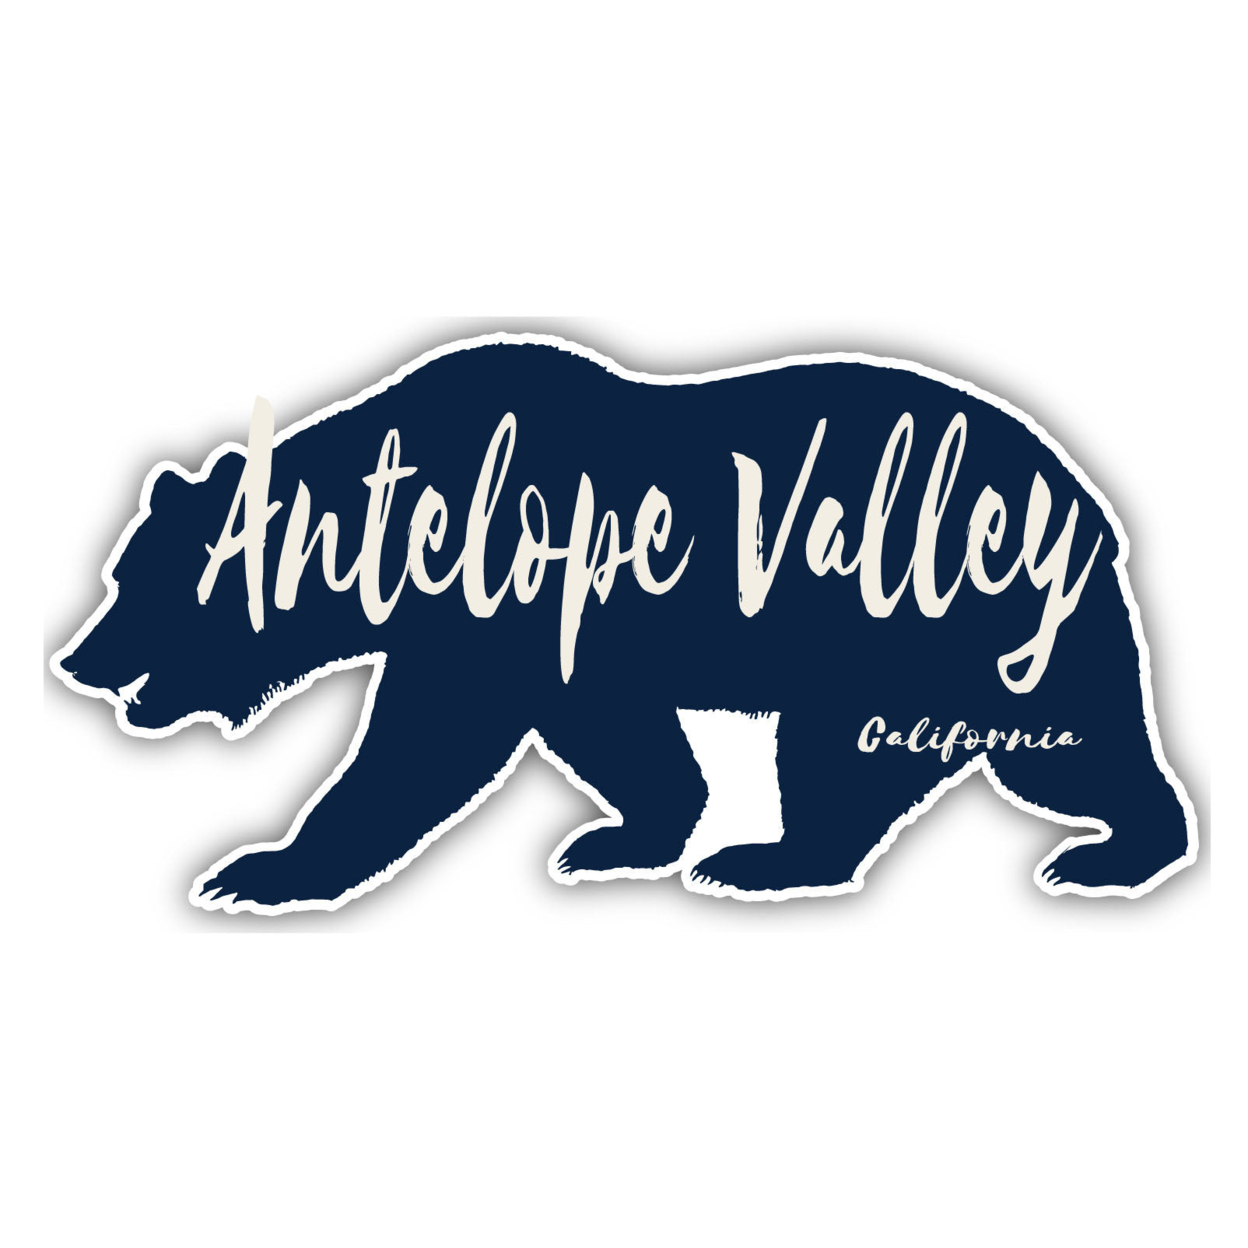 Antelope Valley California Souvenir Decorative Stickers (Choose Theme And Size) - 4-Pack, 6-Inch, Bear